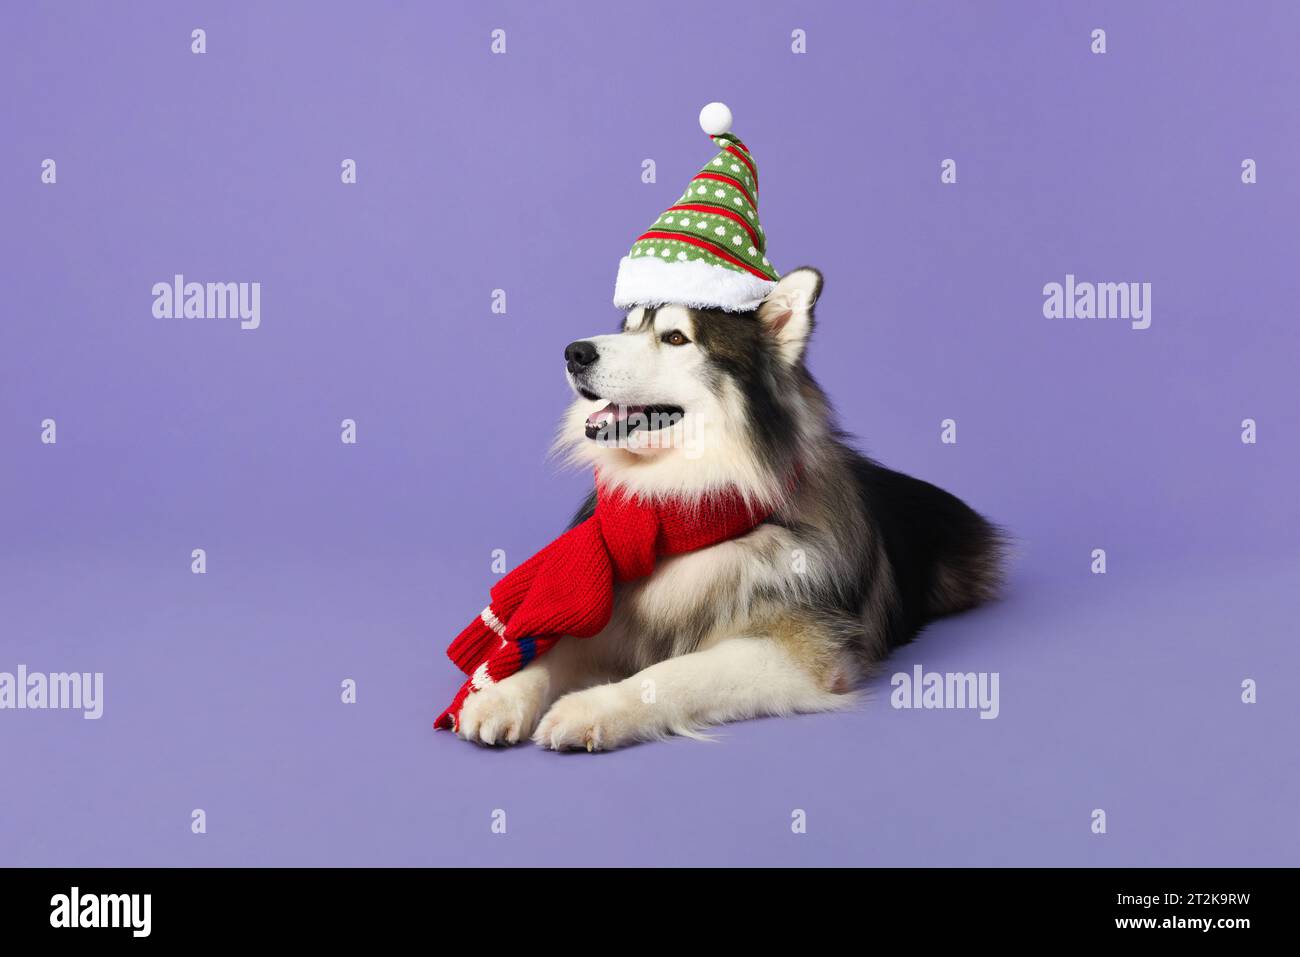 Cute Siberian Husky dog wearing Christmas hat and scarf in isolated purple color studio background Stock Photo